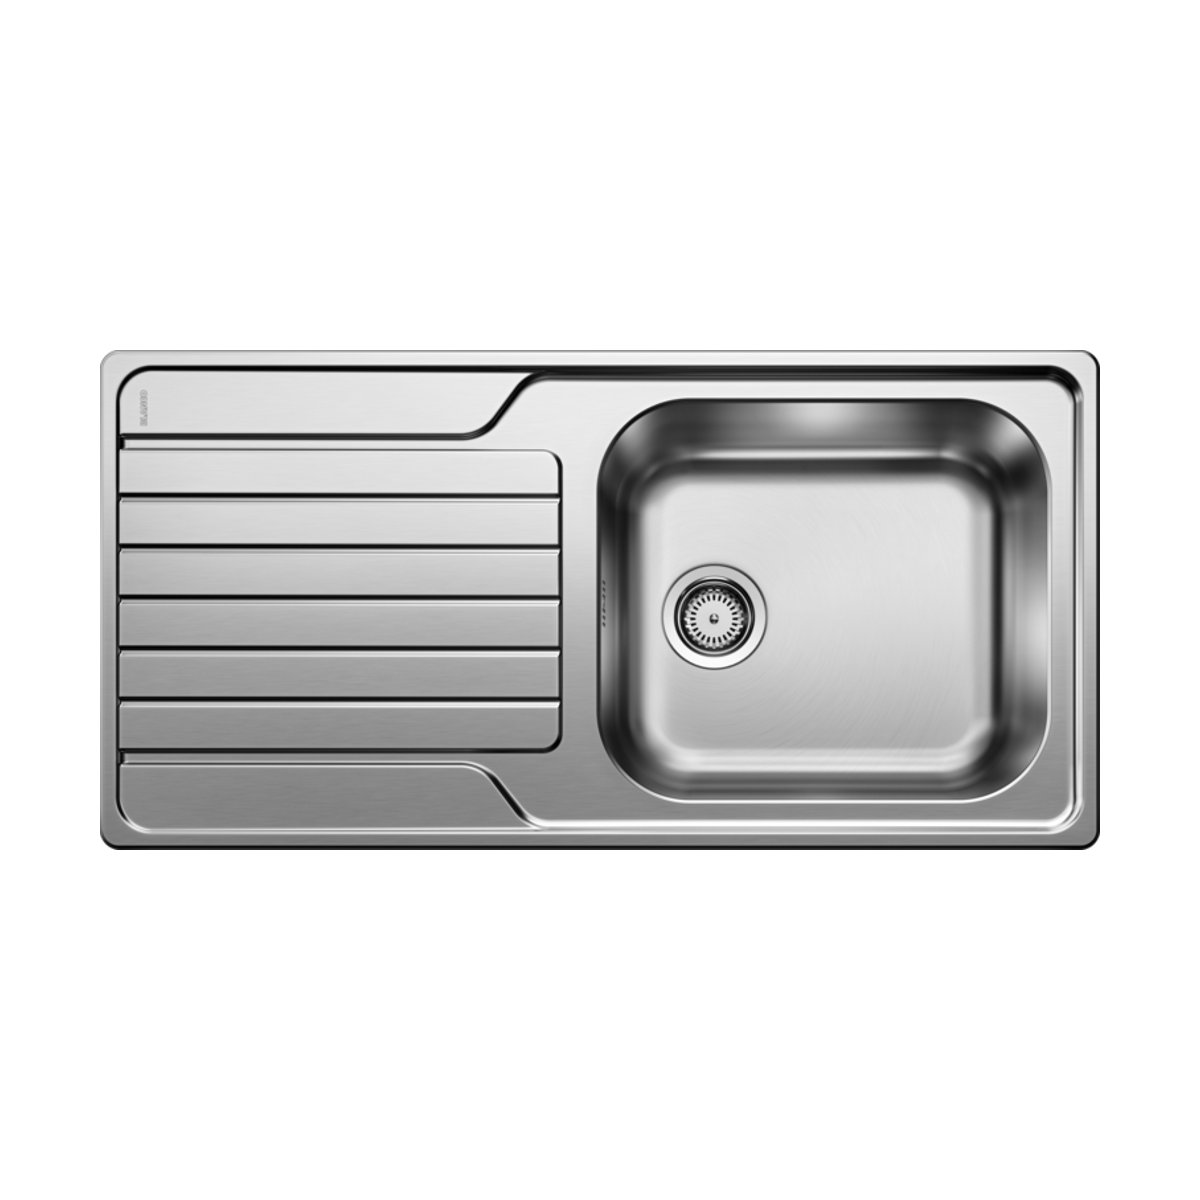 Dinas XL 6 S Blanco Modern 1 Bowl Stainless Steel Kitchen Sink with Reversible Drainer 100×50